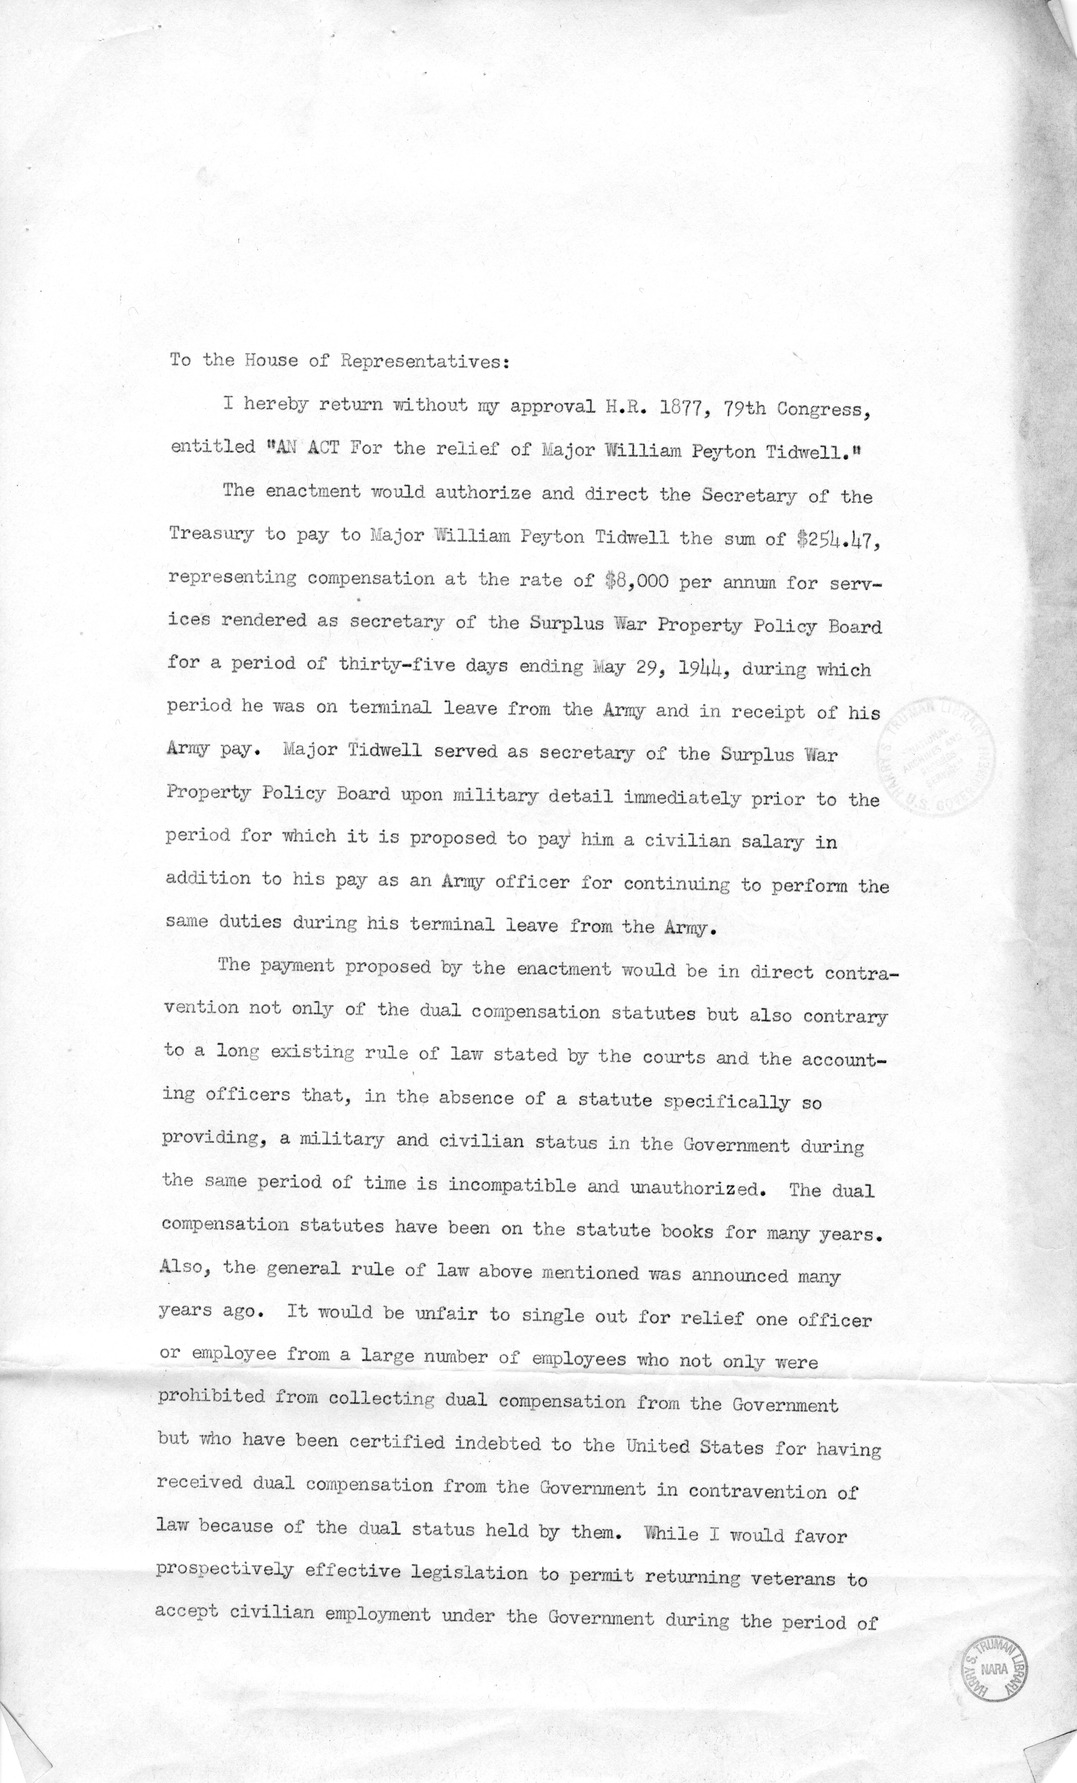 Memorandum from Harold D. Smith to M. C. Latta, H.R. 1877, For the Relief of Major William Peyton Tidwell, with Attachments